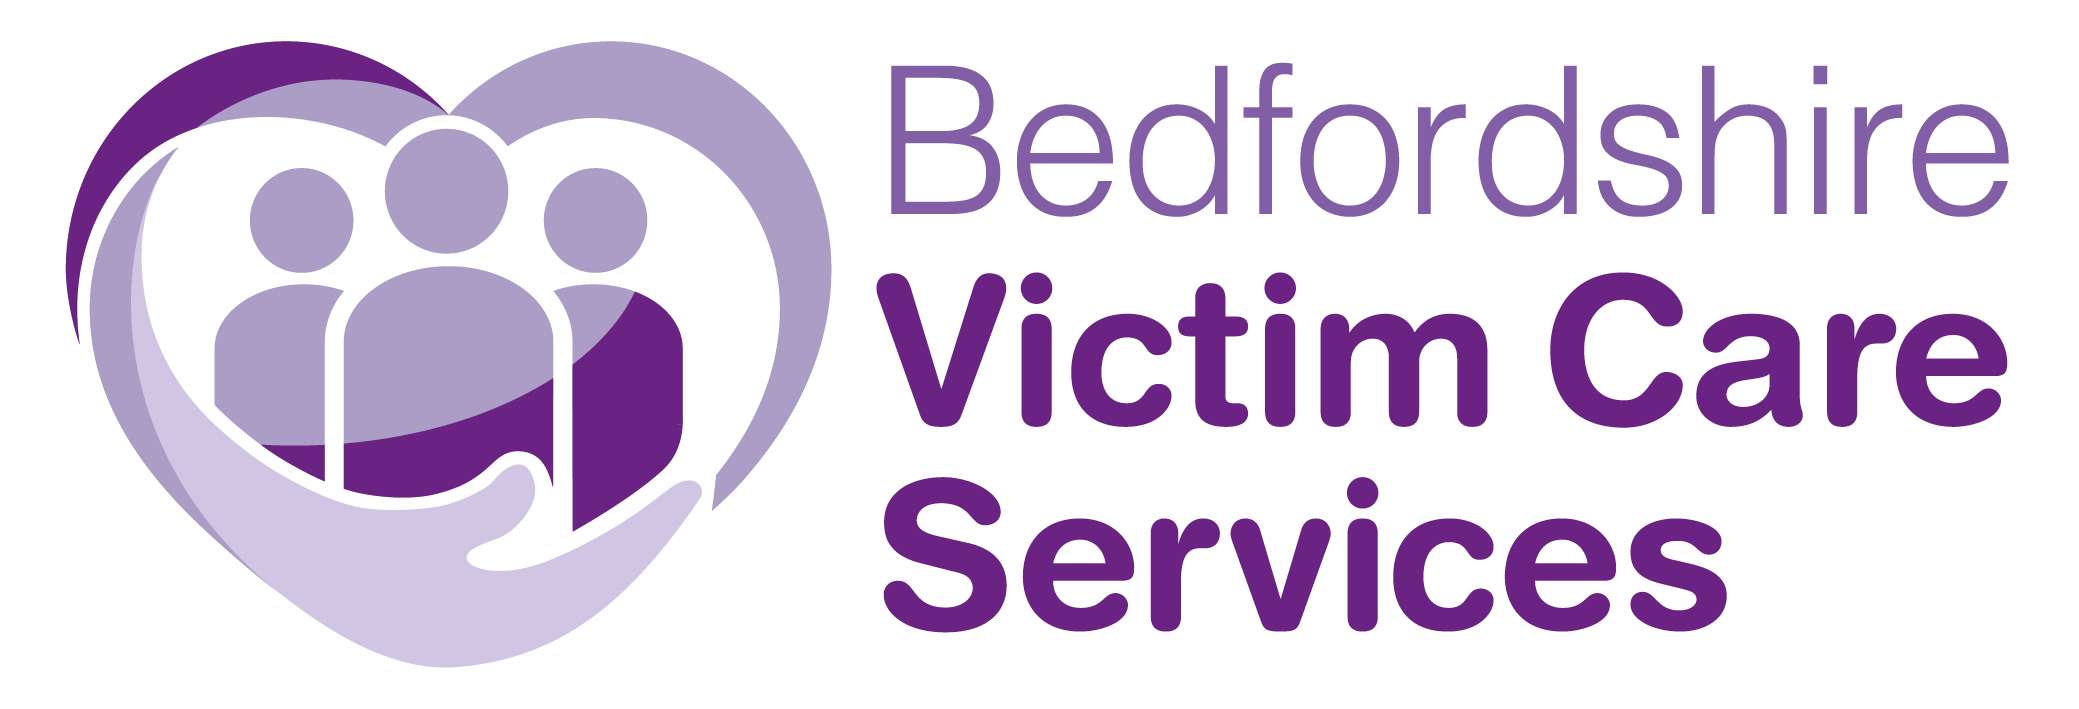 Bedfordshire’s Victim Service, Signpost has a new name